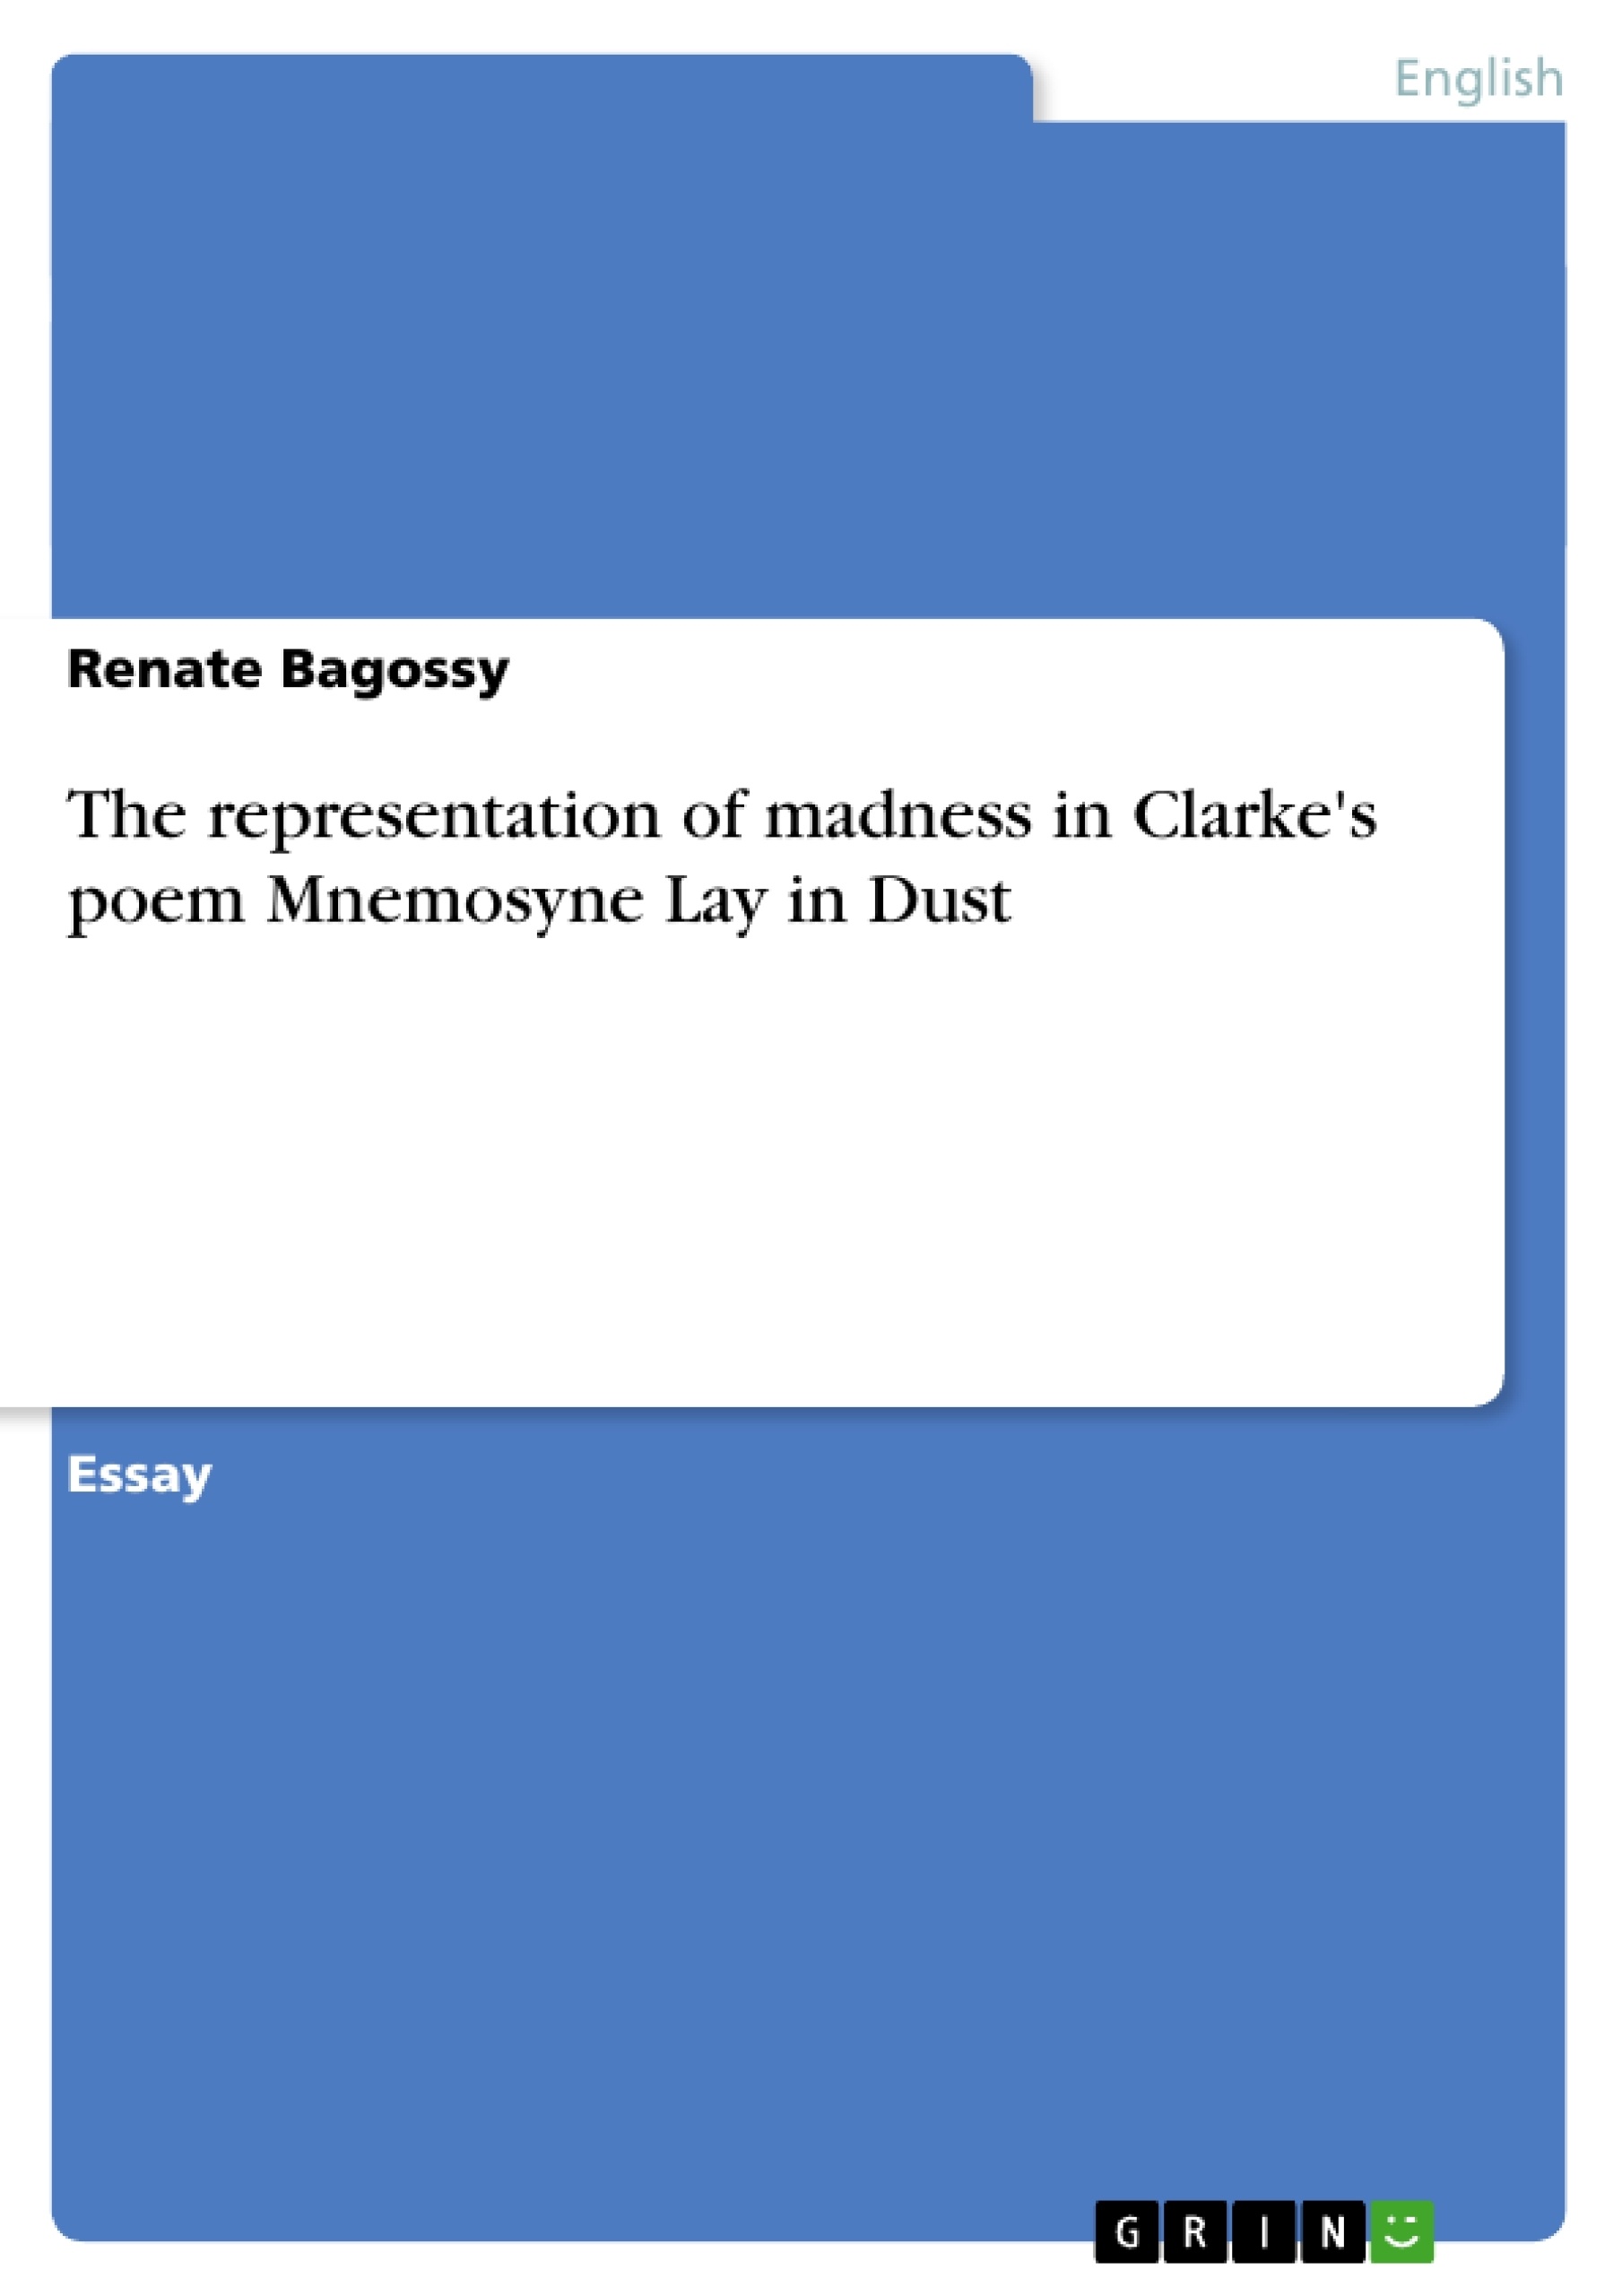 Title: The representation of madness in Clarke's poem Mnemosyne Lay in Dust